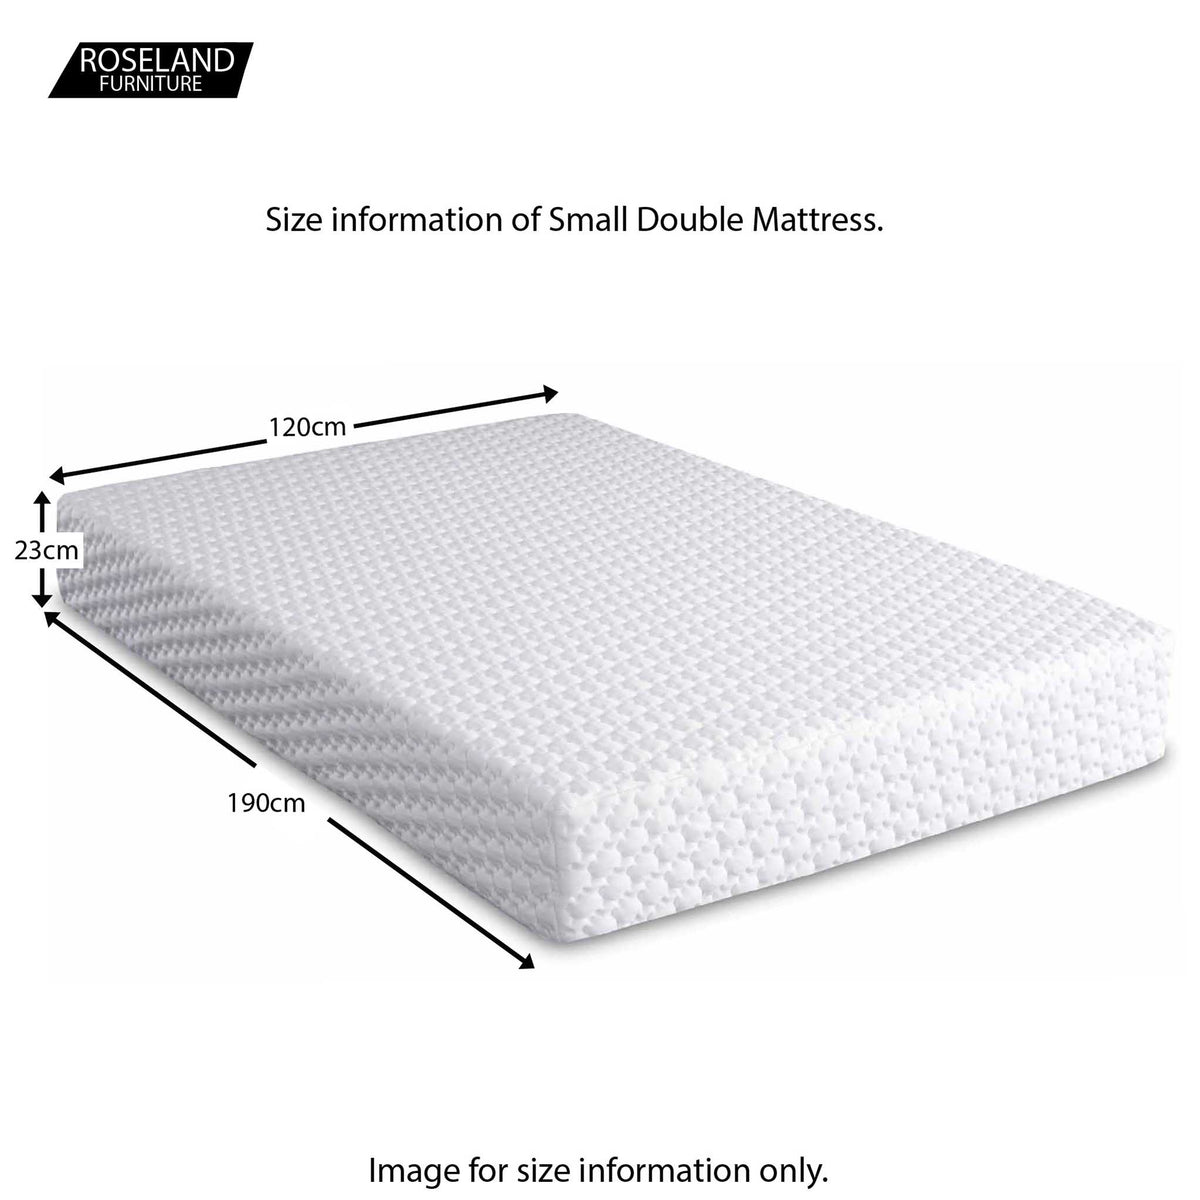 MemoryPedic Emperor Memory Support Mattresses with Revo & Latex Foam - adult 4ft small double size guide